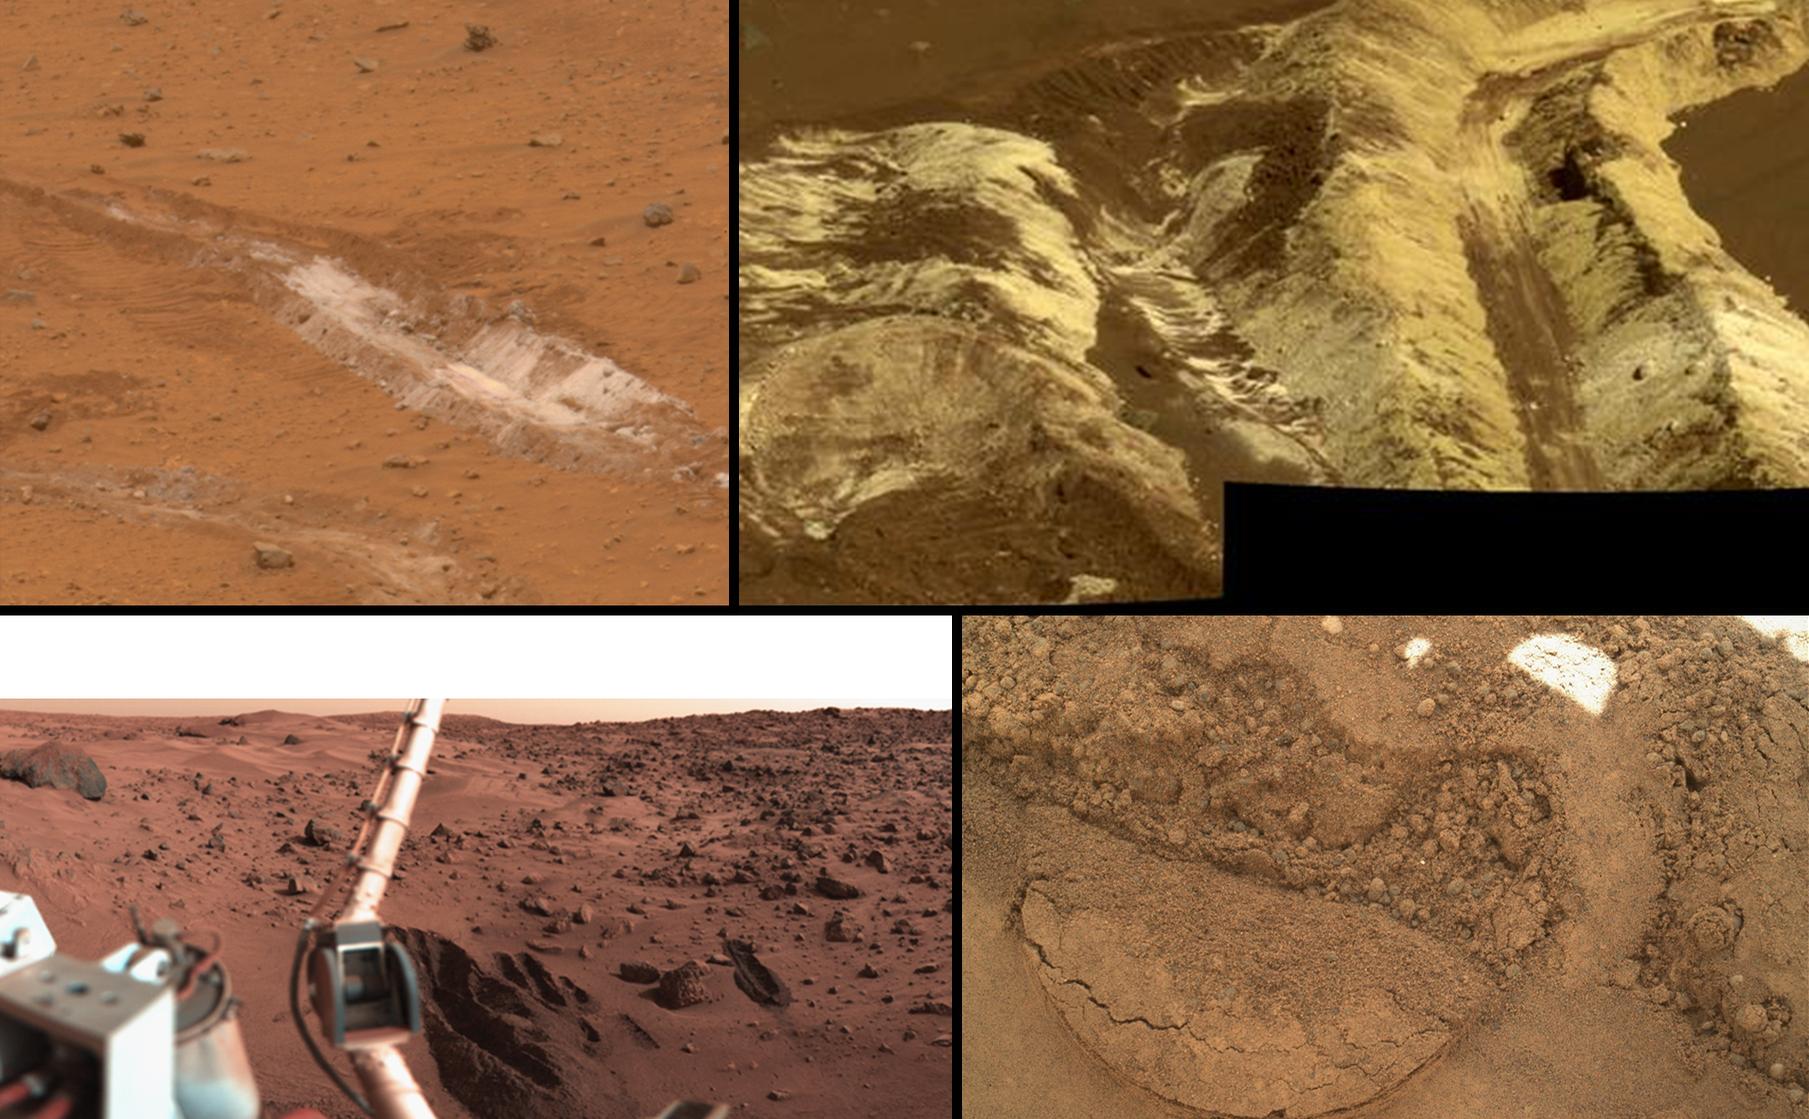 This collage shows the variety of soils found at landing sites on Mars.